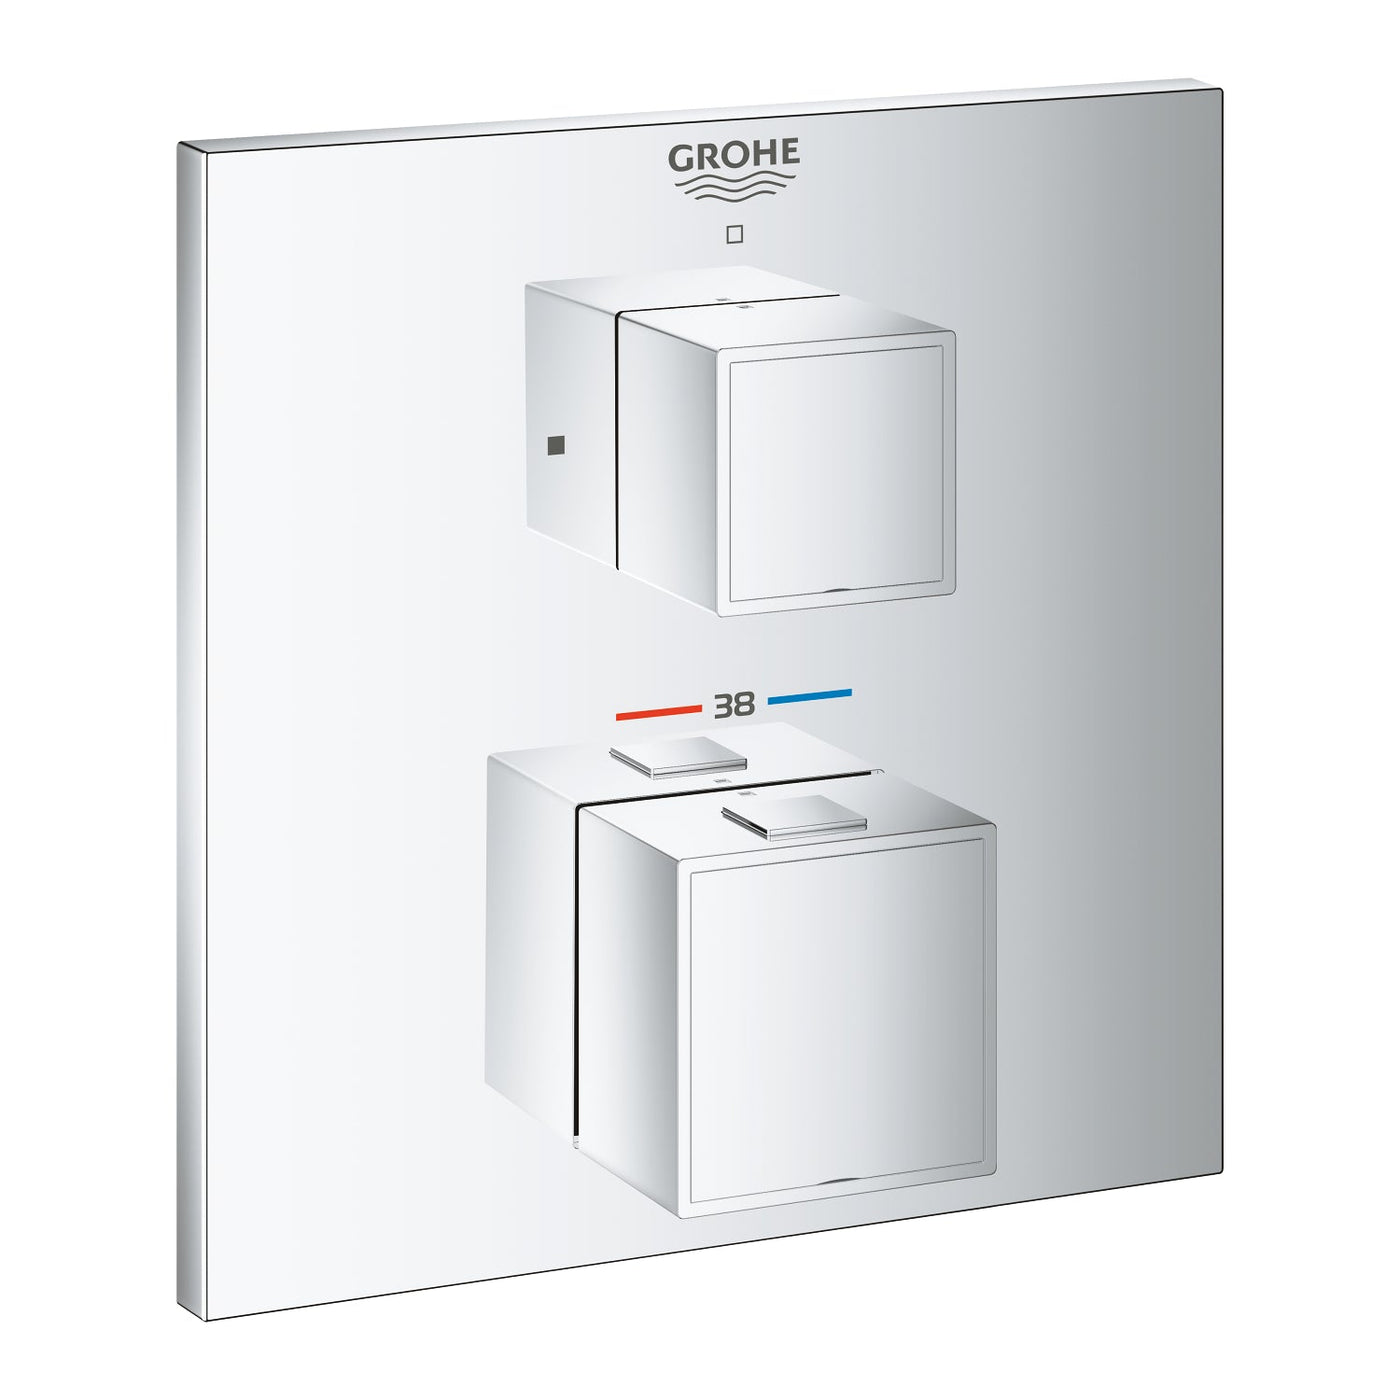 Grohe Chrome Grohtherm Cube Thermostatic mixer for 1 outlet with shut off valve - Letta London - Twin Valves With Diverter